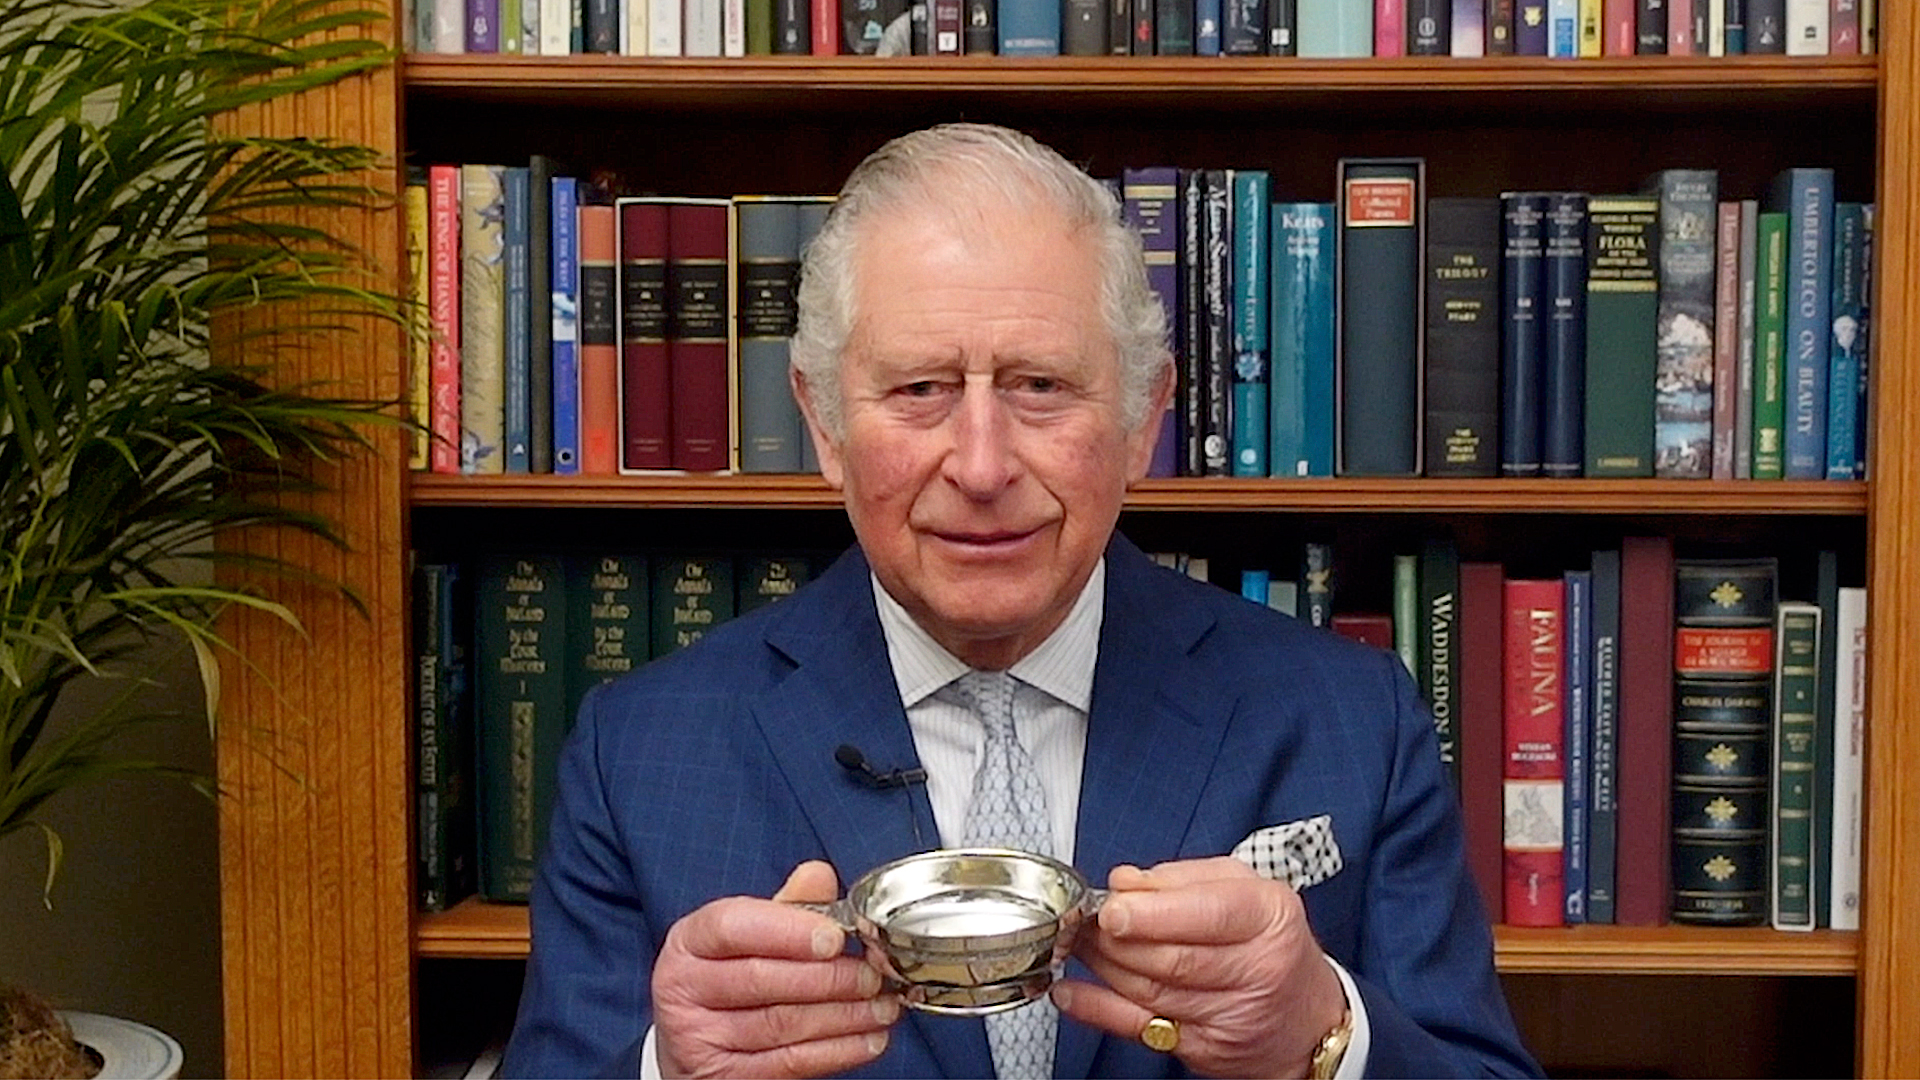 His Royal Highness, The Prince of Wales (Duke of Rothesay) delivers an inspirational message to Keepers of the Quaich. Photo courtesy Keepers of the Quaich.